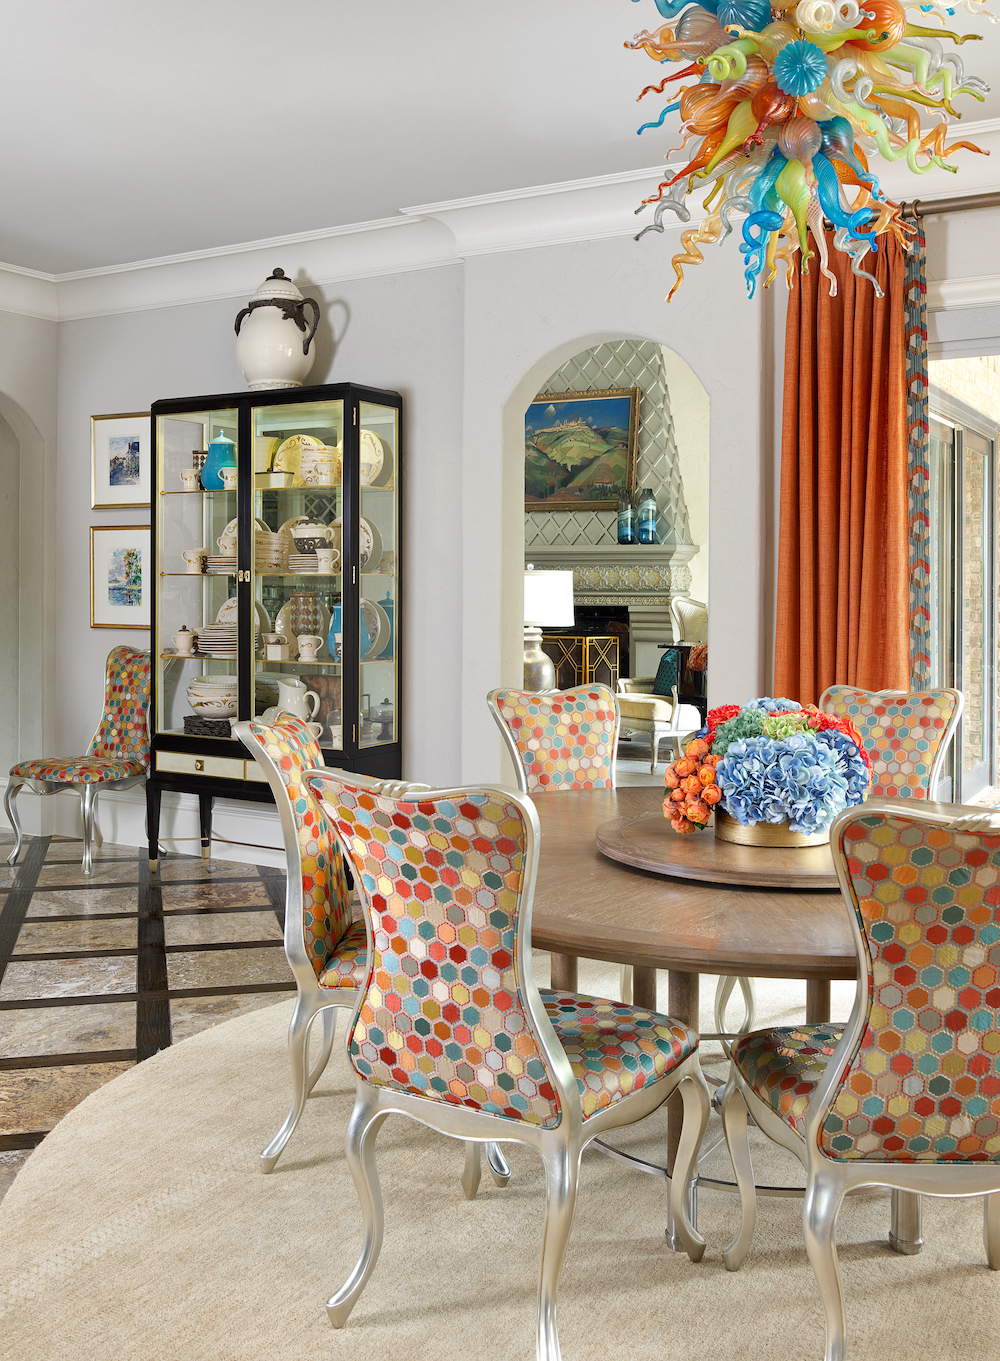 Orange fabric window curtains and multi fabric dining chairs